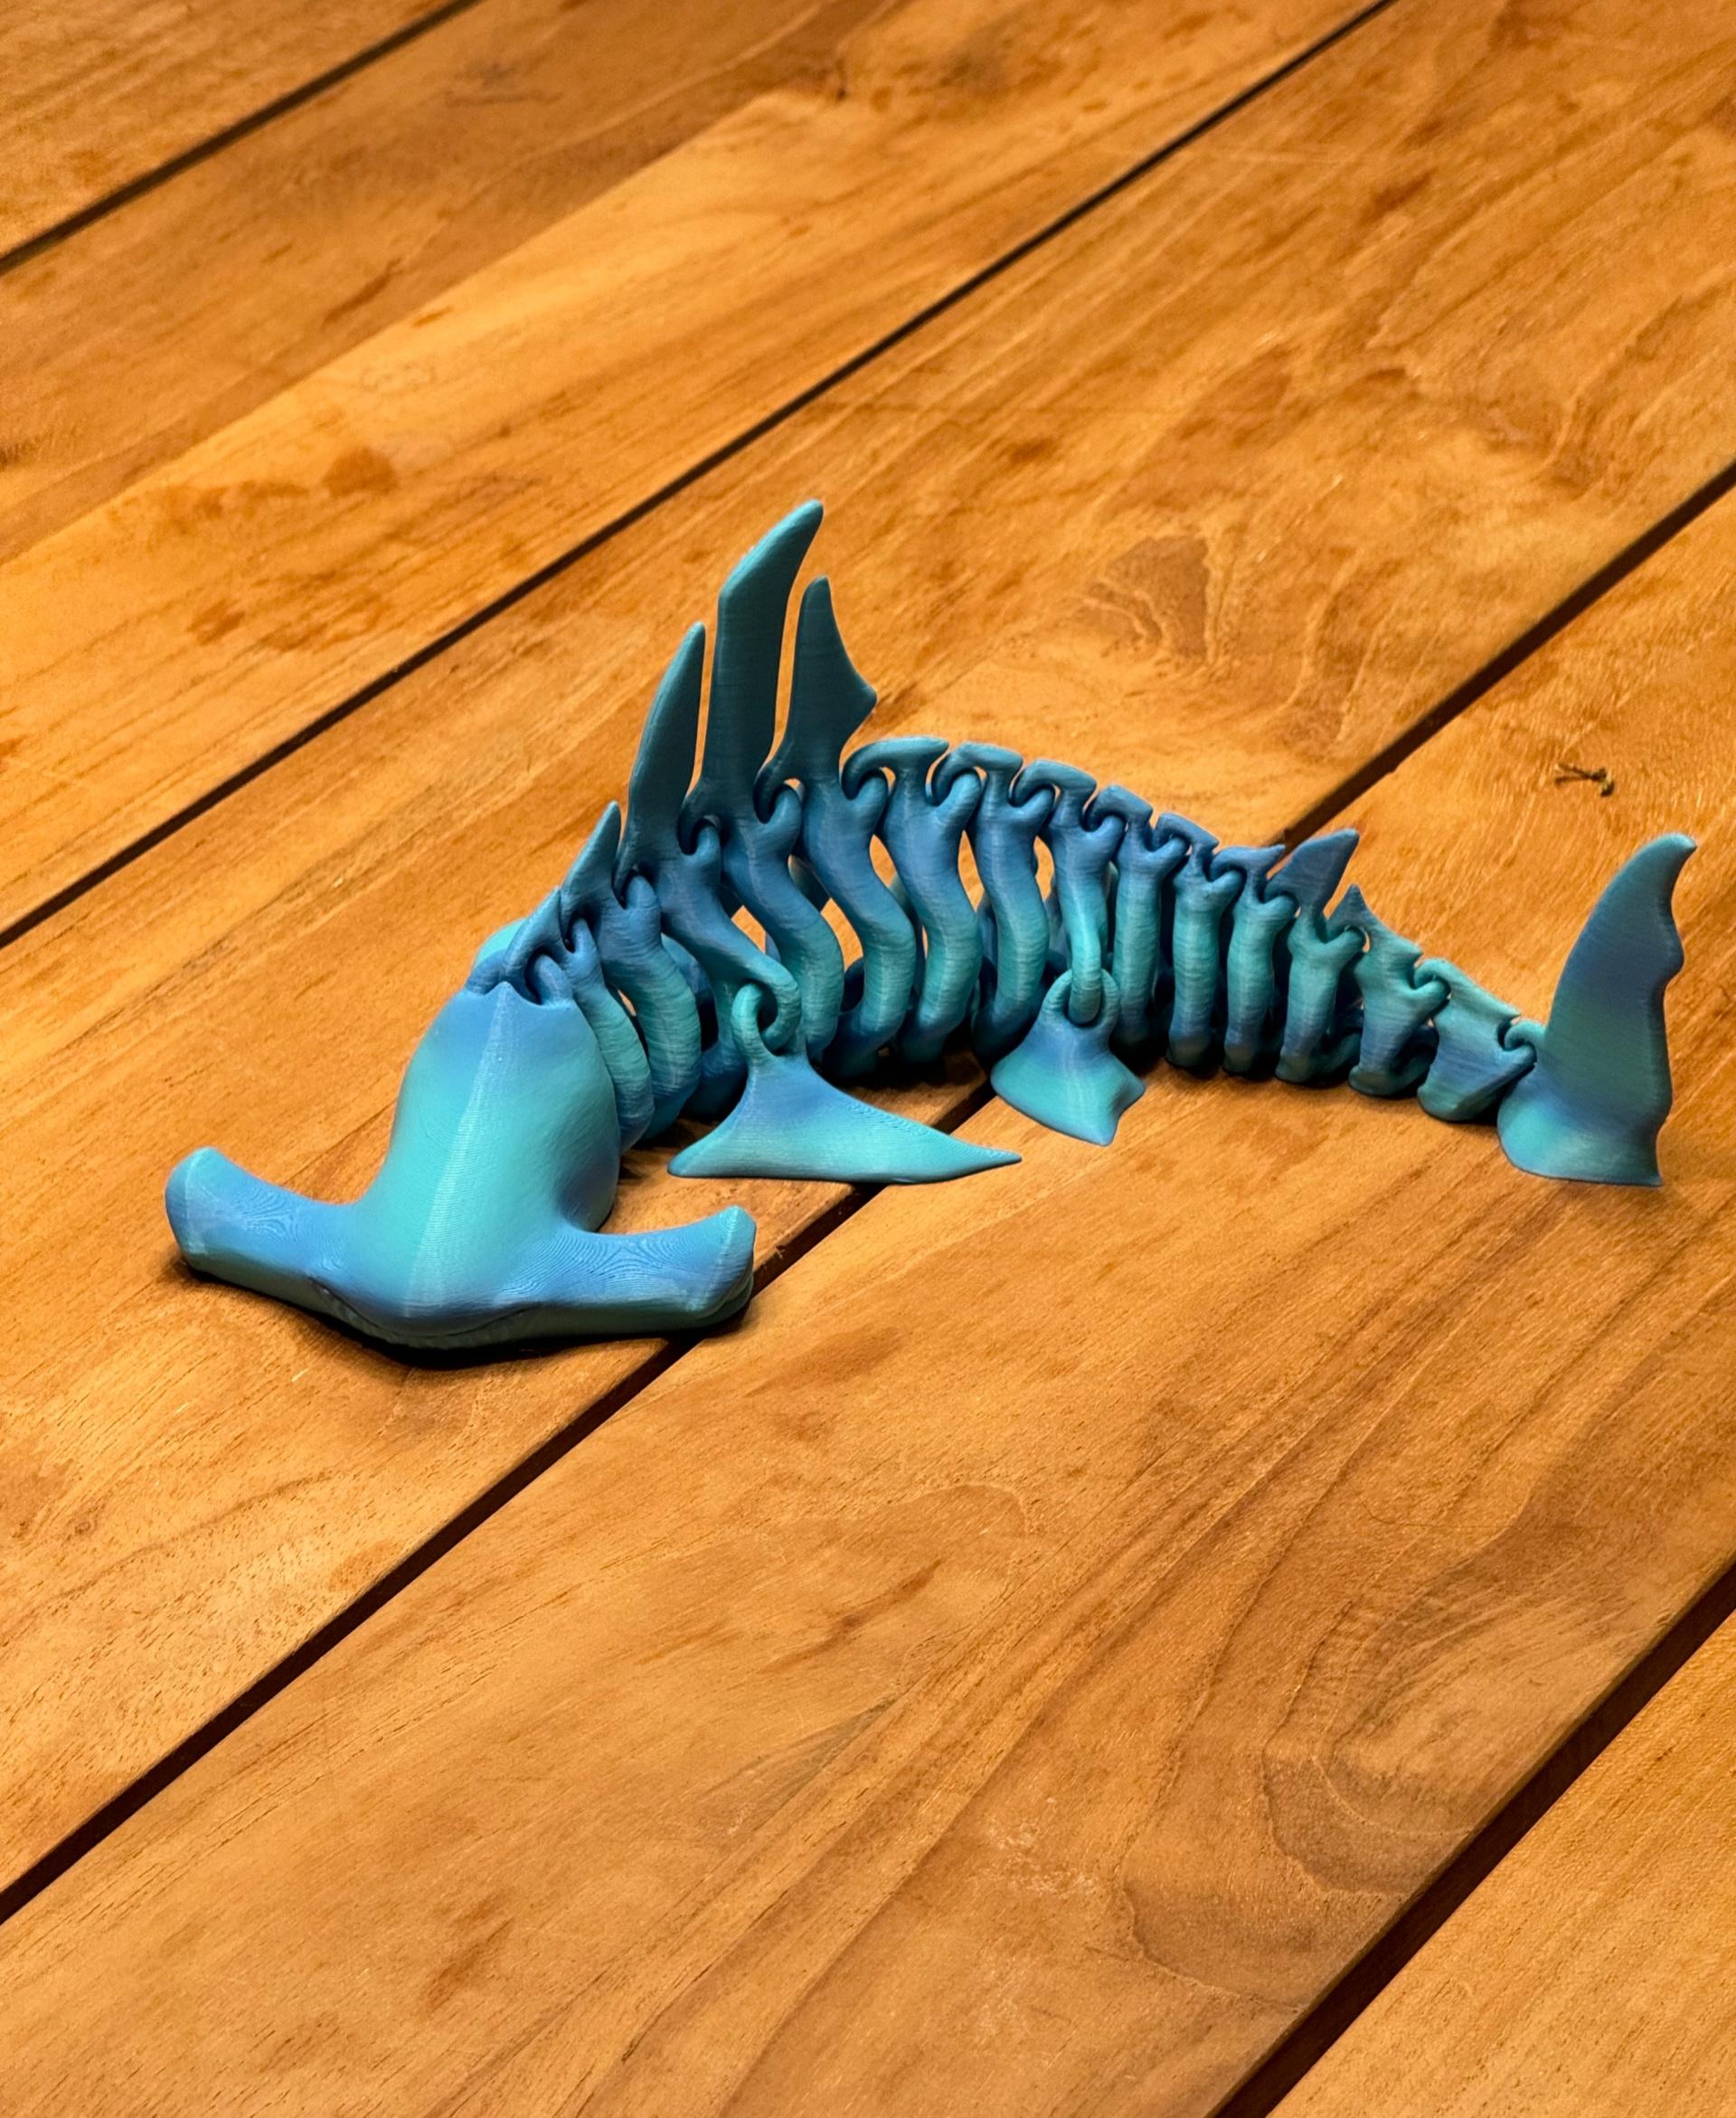 Hammerhead  Shark  Bones - Printed it in Bambu's "Ocean to Meadow" PLA. Can out beautiful! Very rugged and fun to play with. I do wish it didn't have the cartoony mouth that's in the wrong place. - 3d model